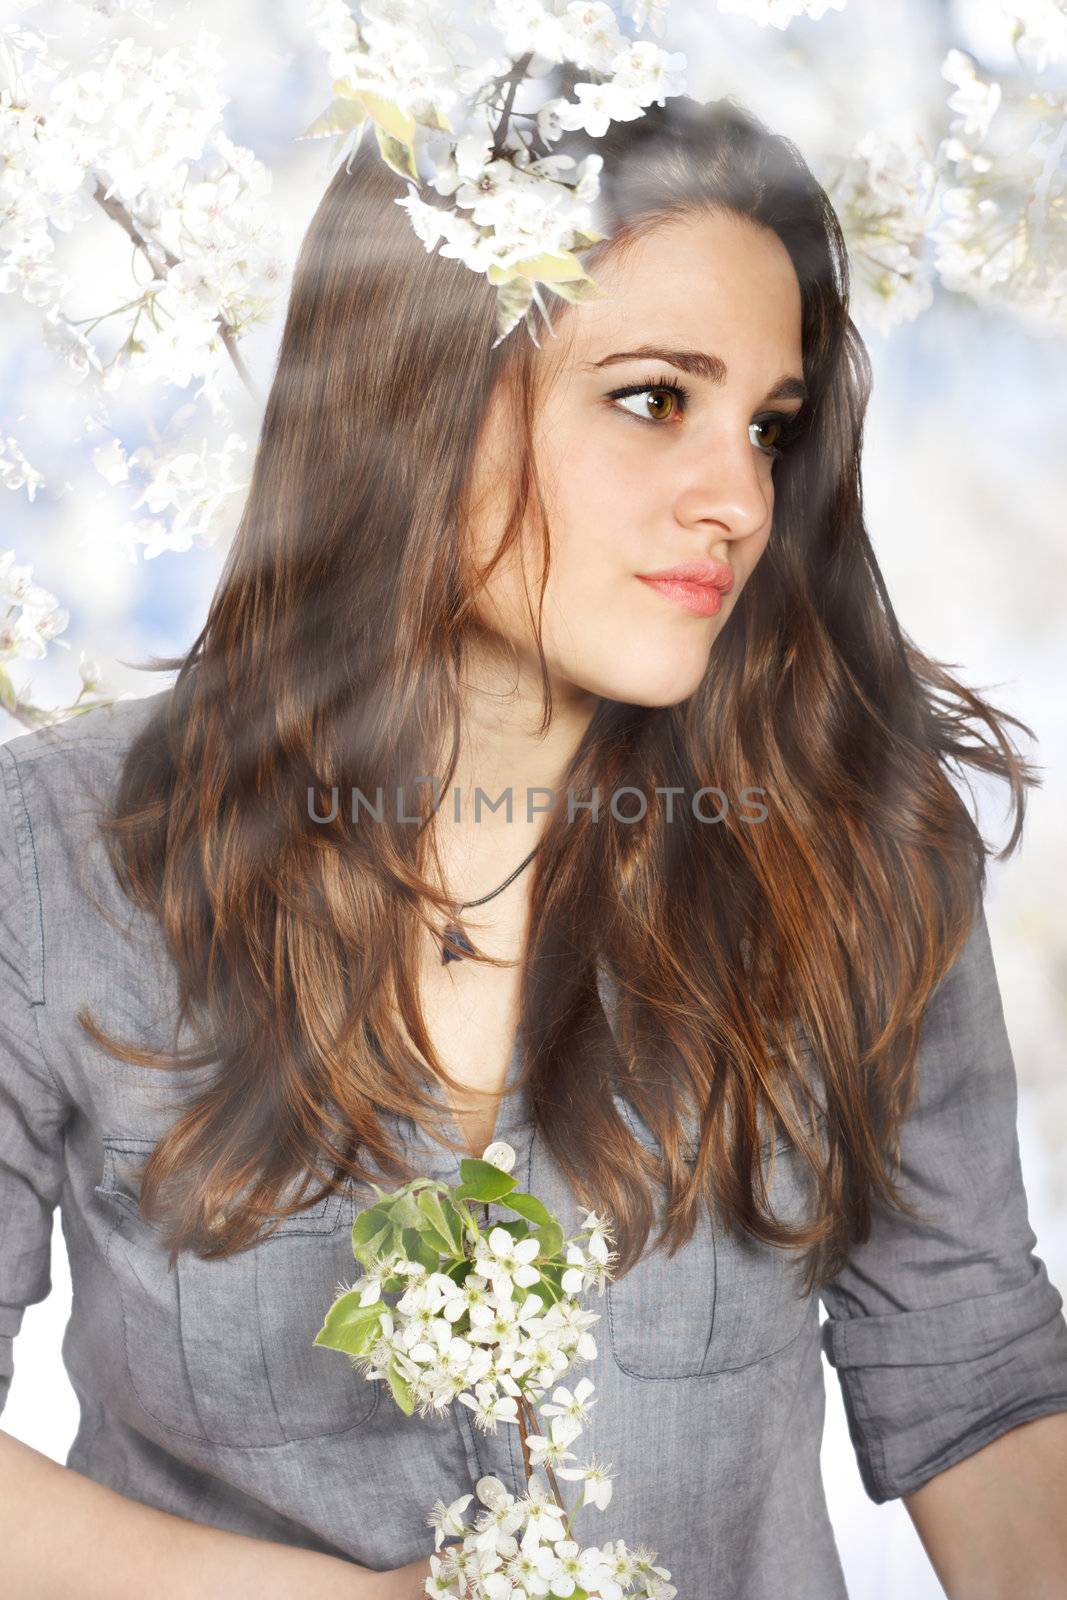 Portrait of a Beautiful Girl with Flowers from a Blooming Tree